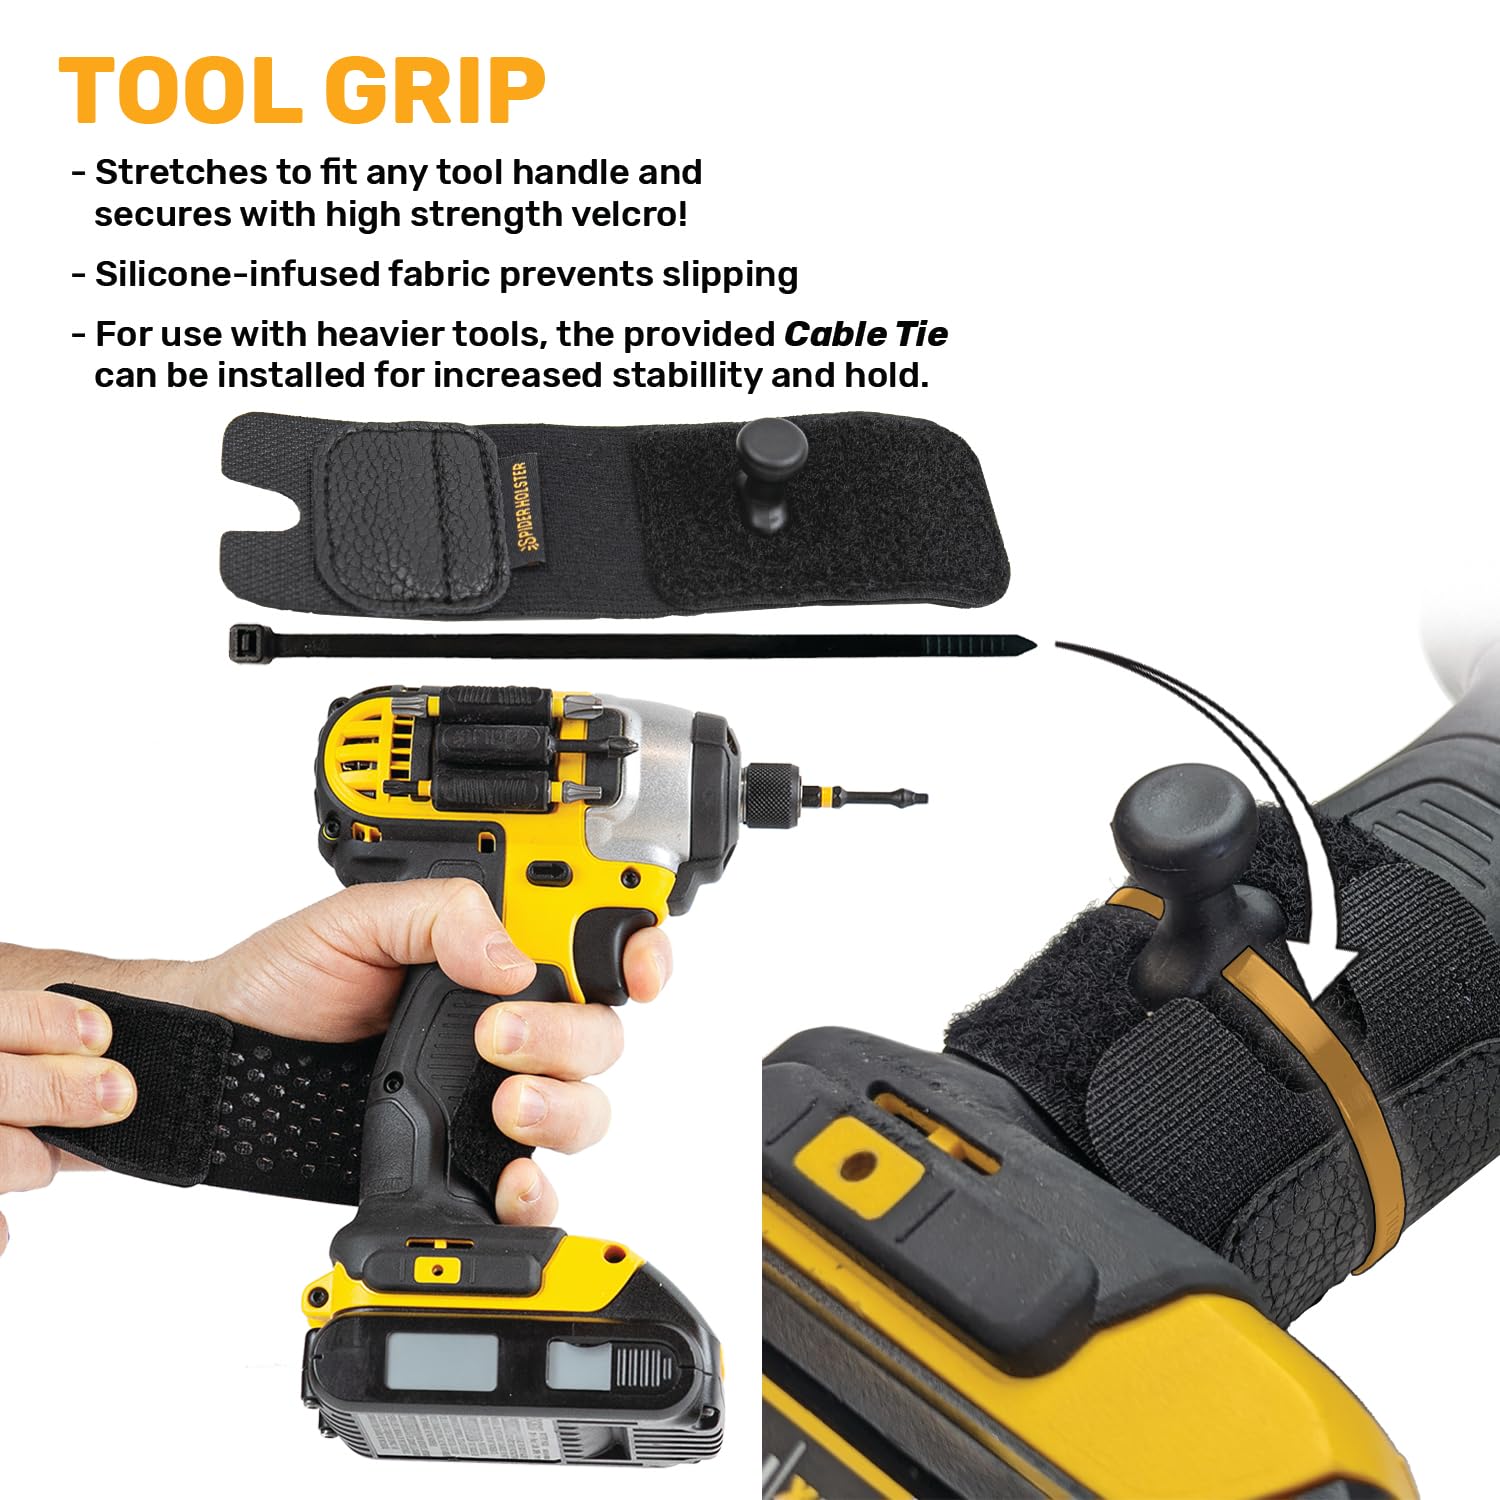 Spider Tool Holster Set - Self Locking, Quick Draw Belt Holster Clip + Elastic Tool Grip - Improve The Way You Carry Your Power Drill, Driver, Multitool, Pneumatic, Flashlight, Hammer, Saw and More! …